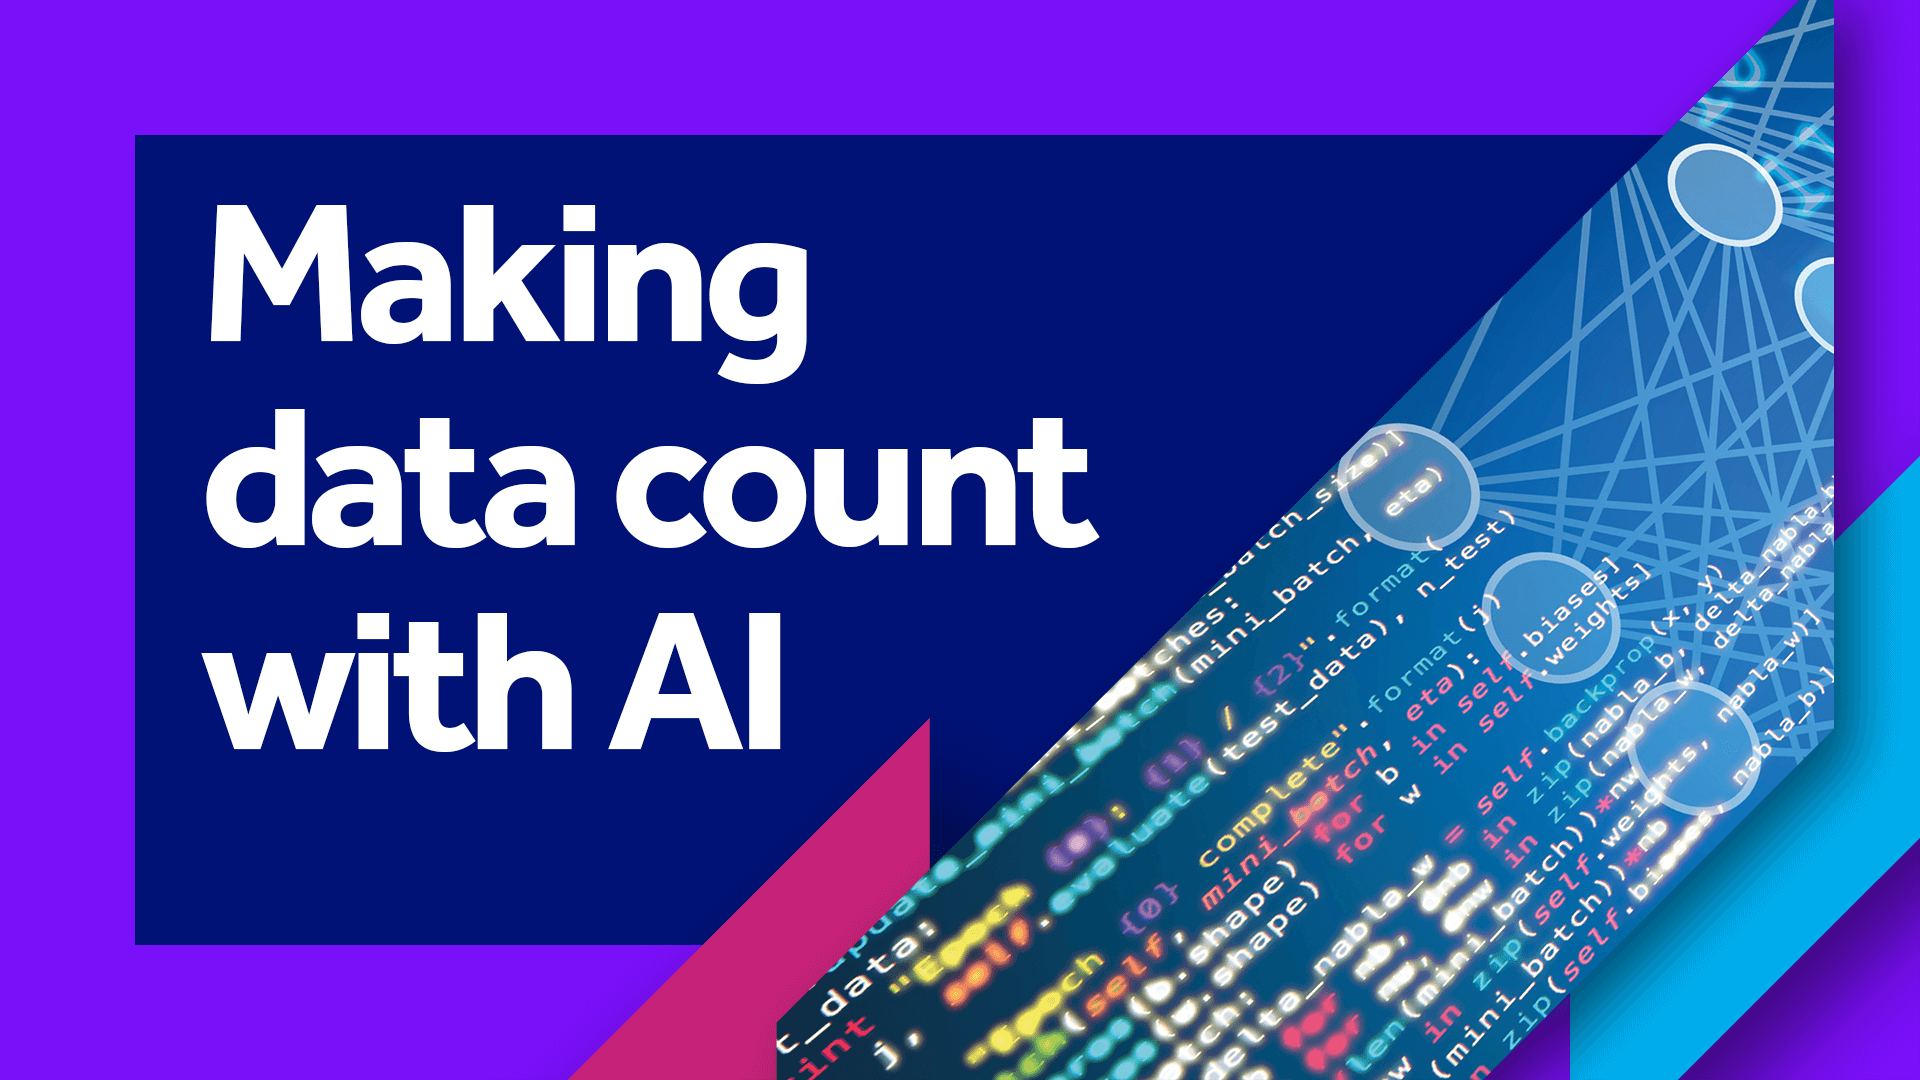 Making data count with AI